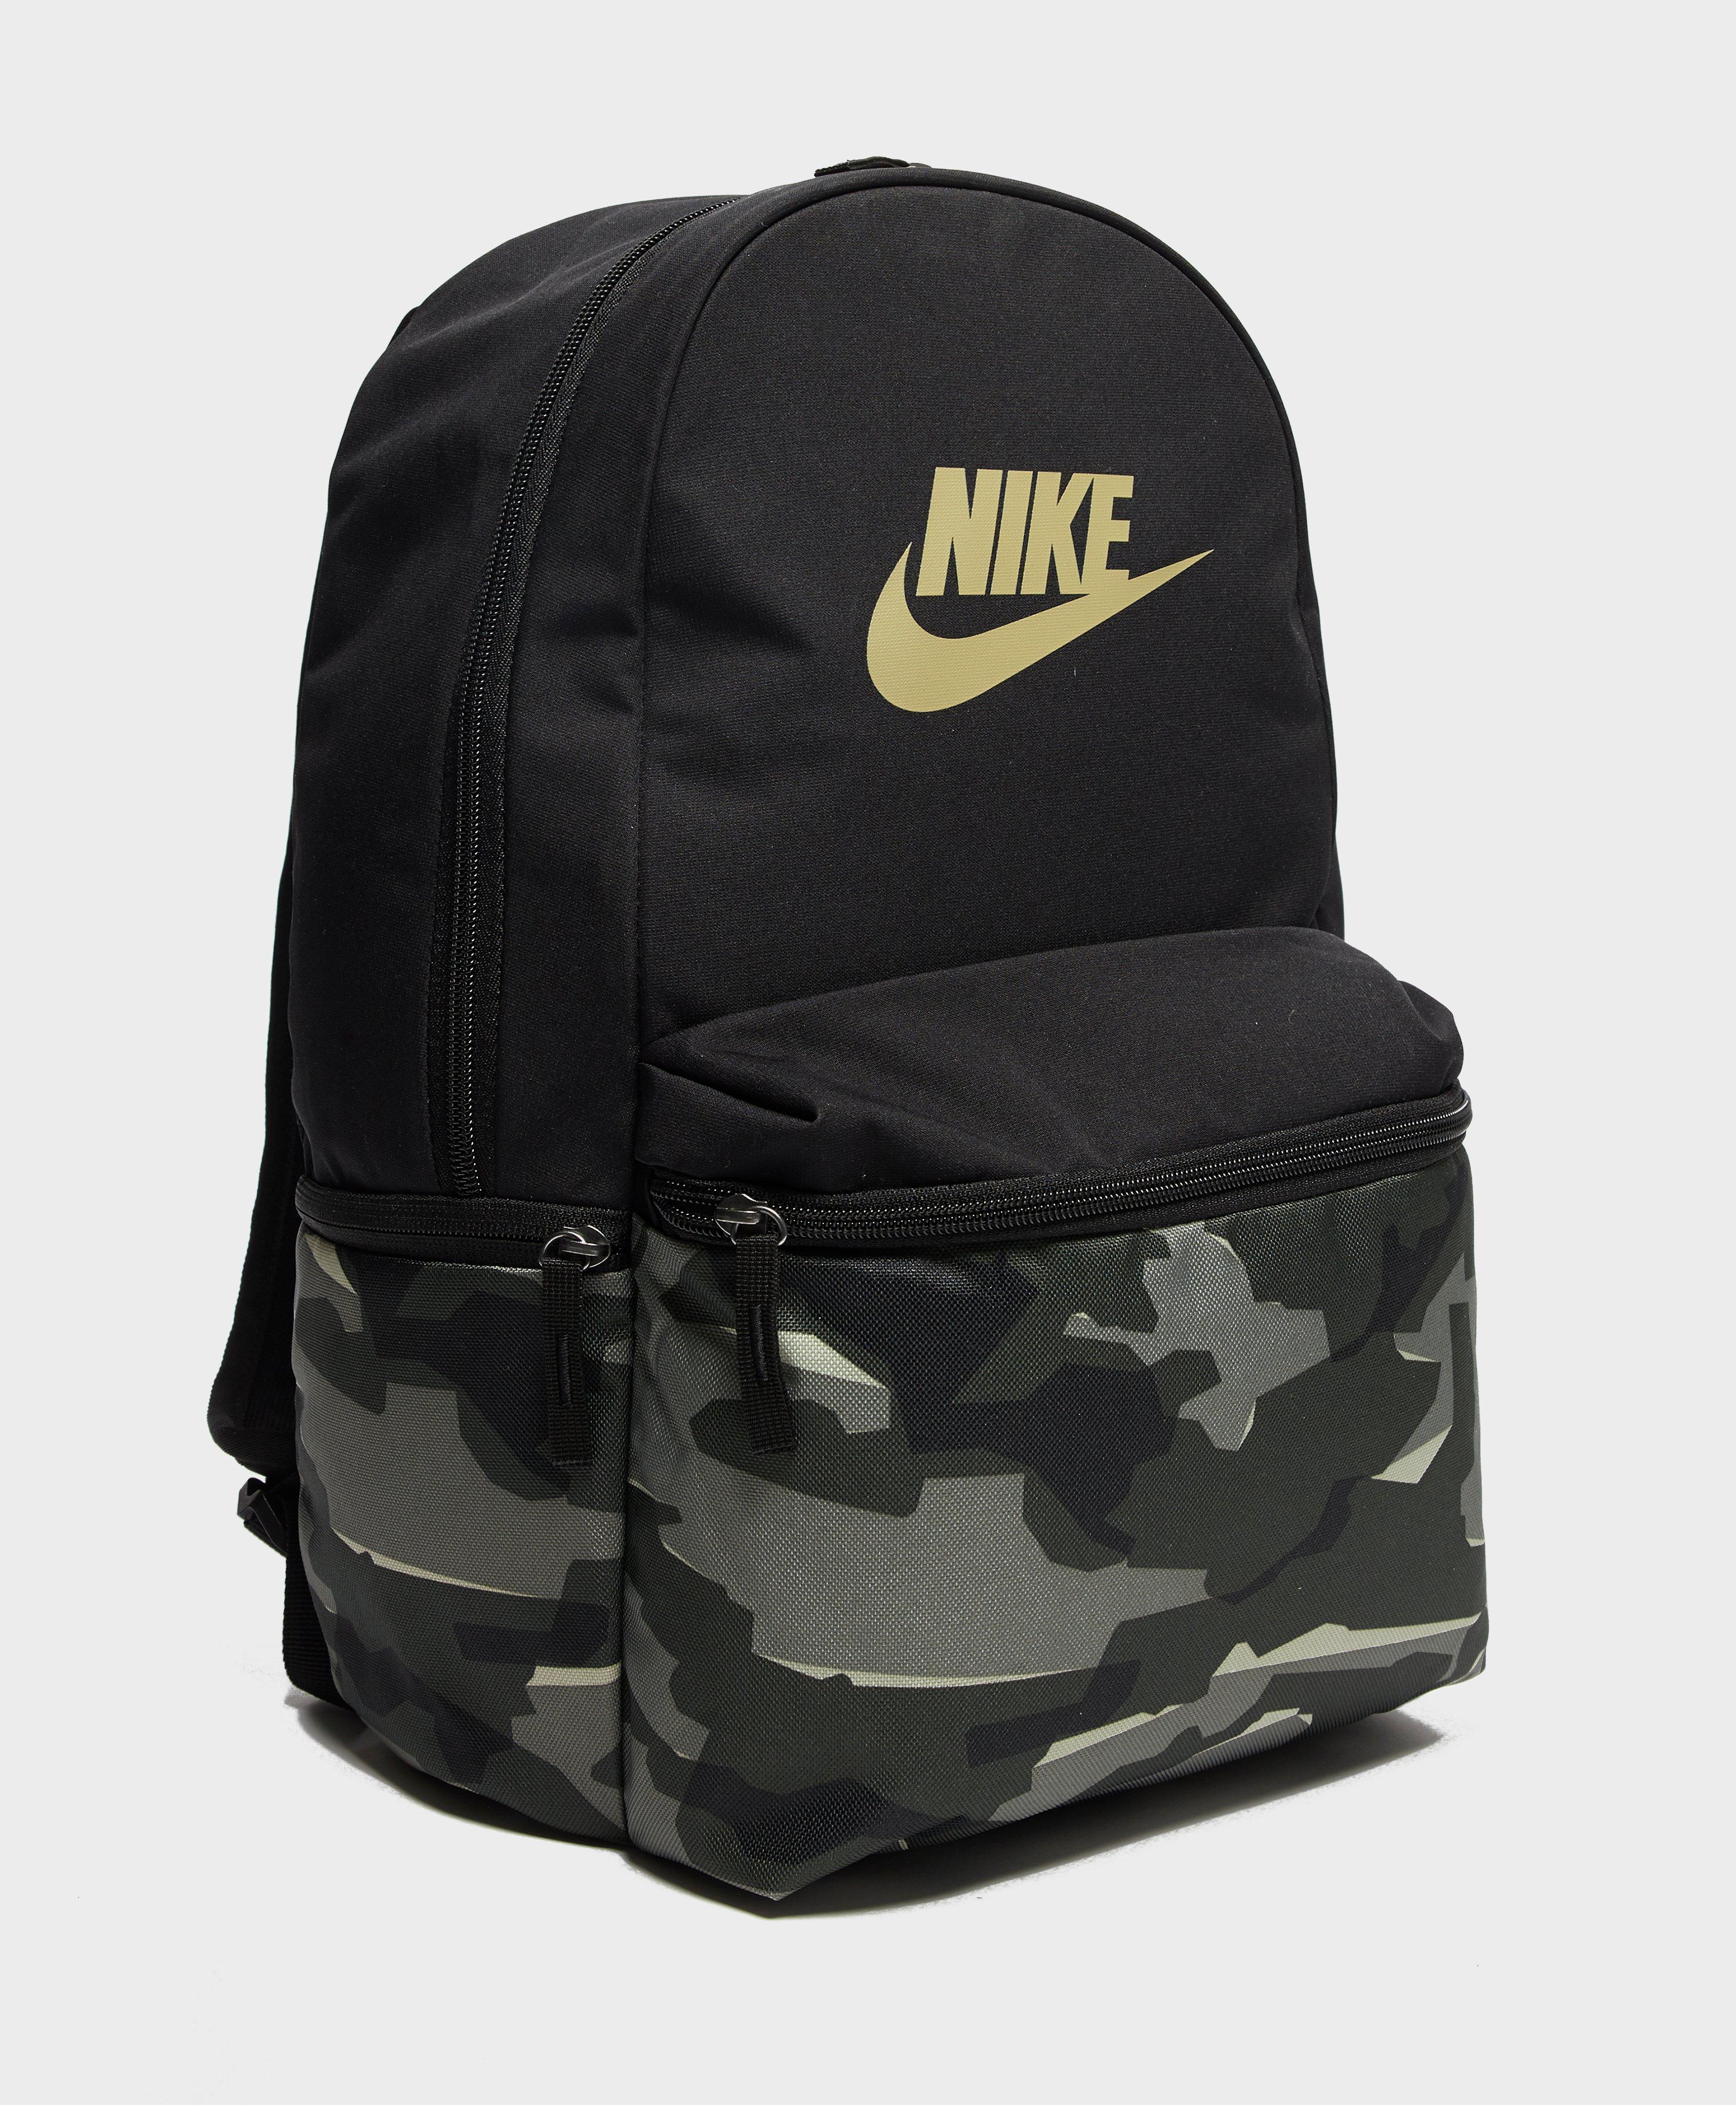 Nike Synthetic Heritage Camo Backpack in Black for Men - Lyst